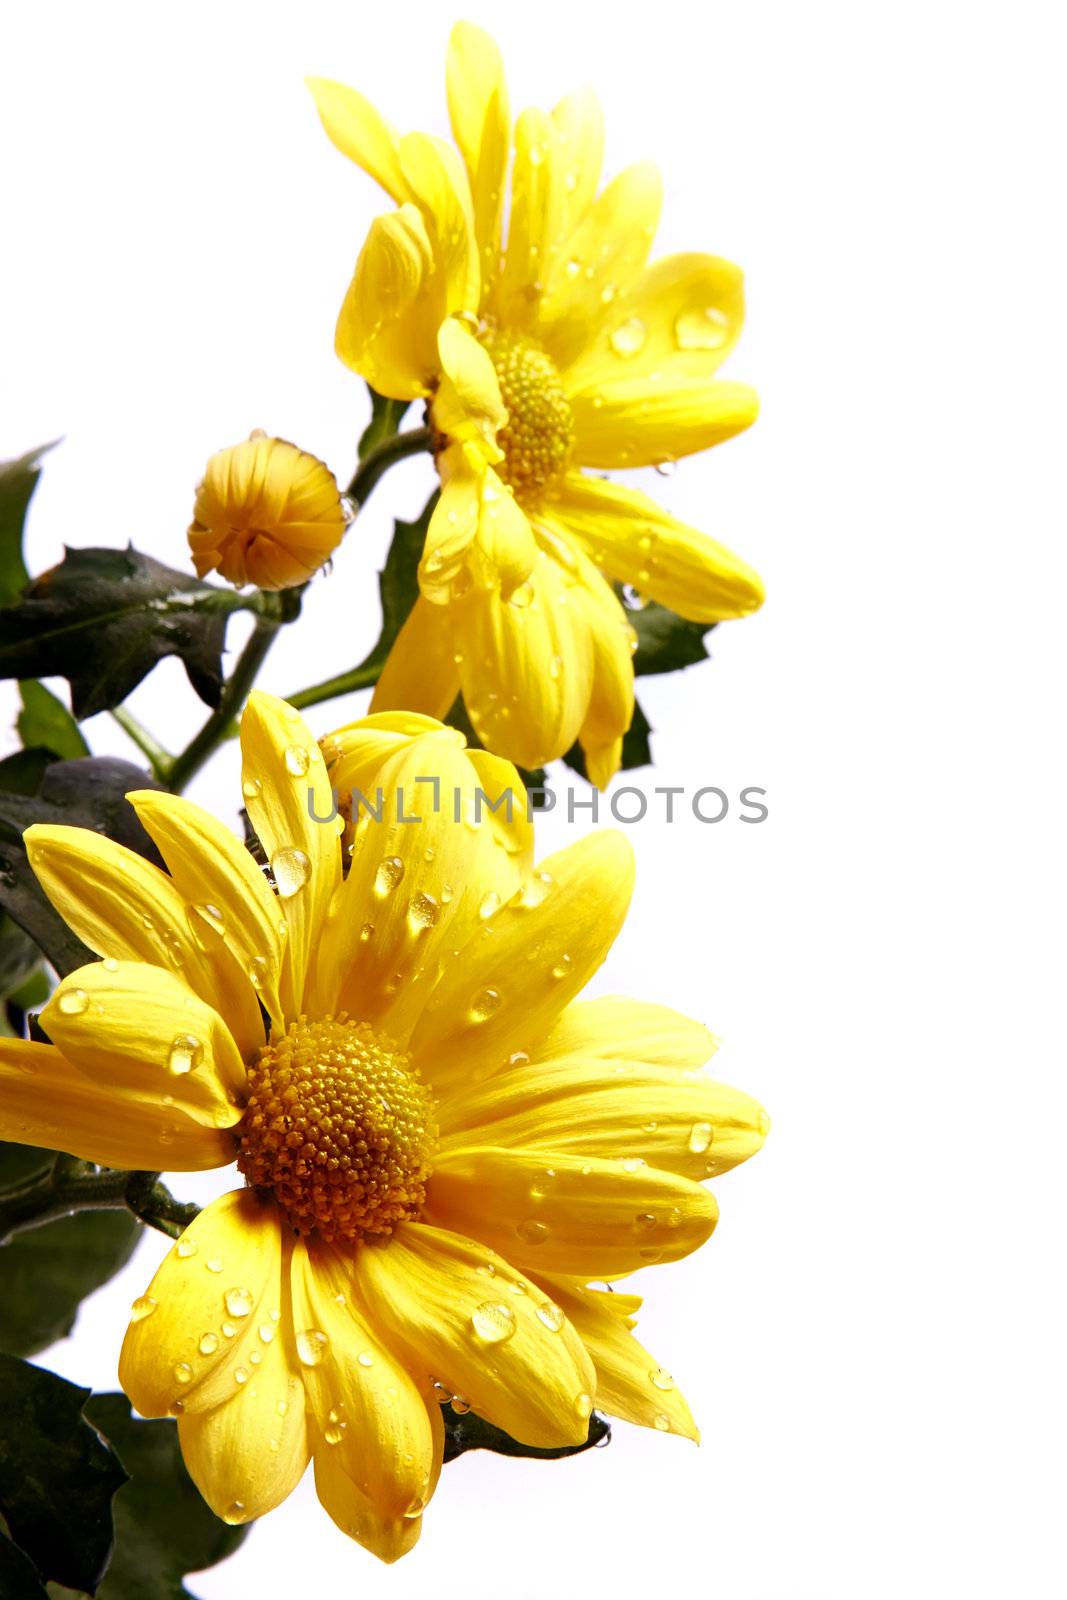 Bouquet of yellow chrysanthemums on a white background